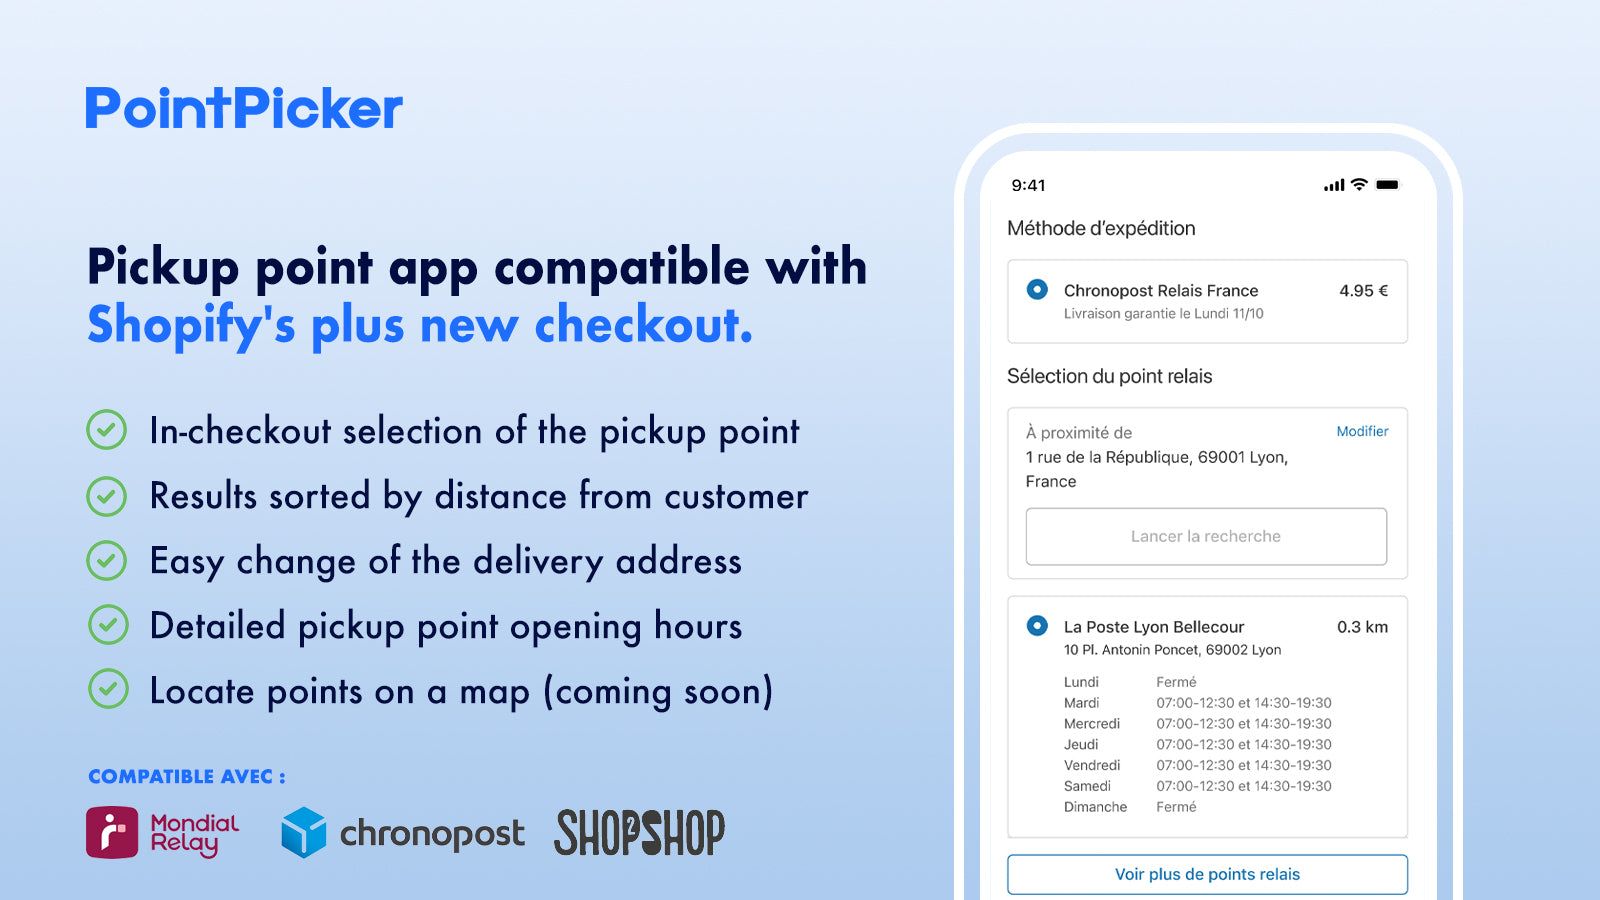 PointPicker app - Compatible with the new checkout